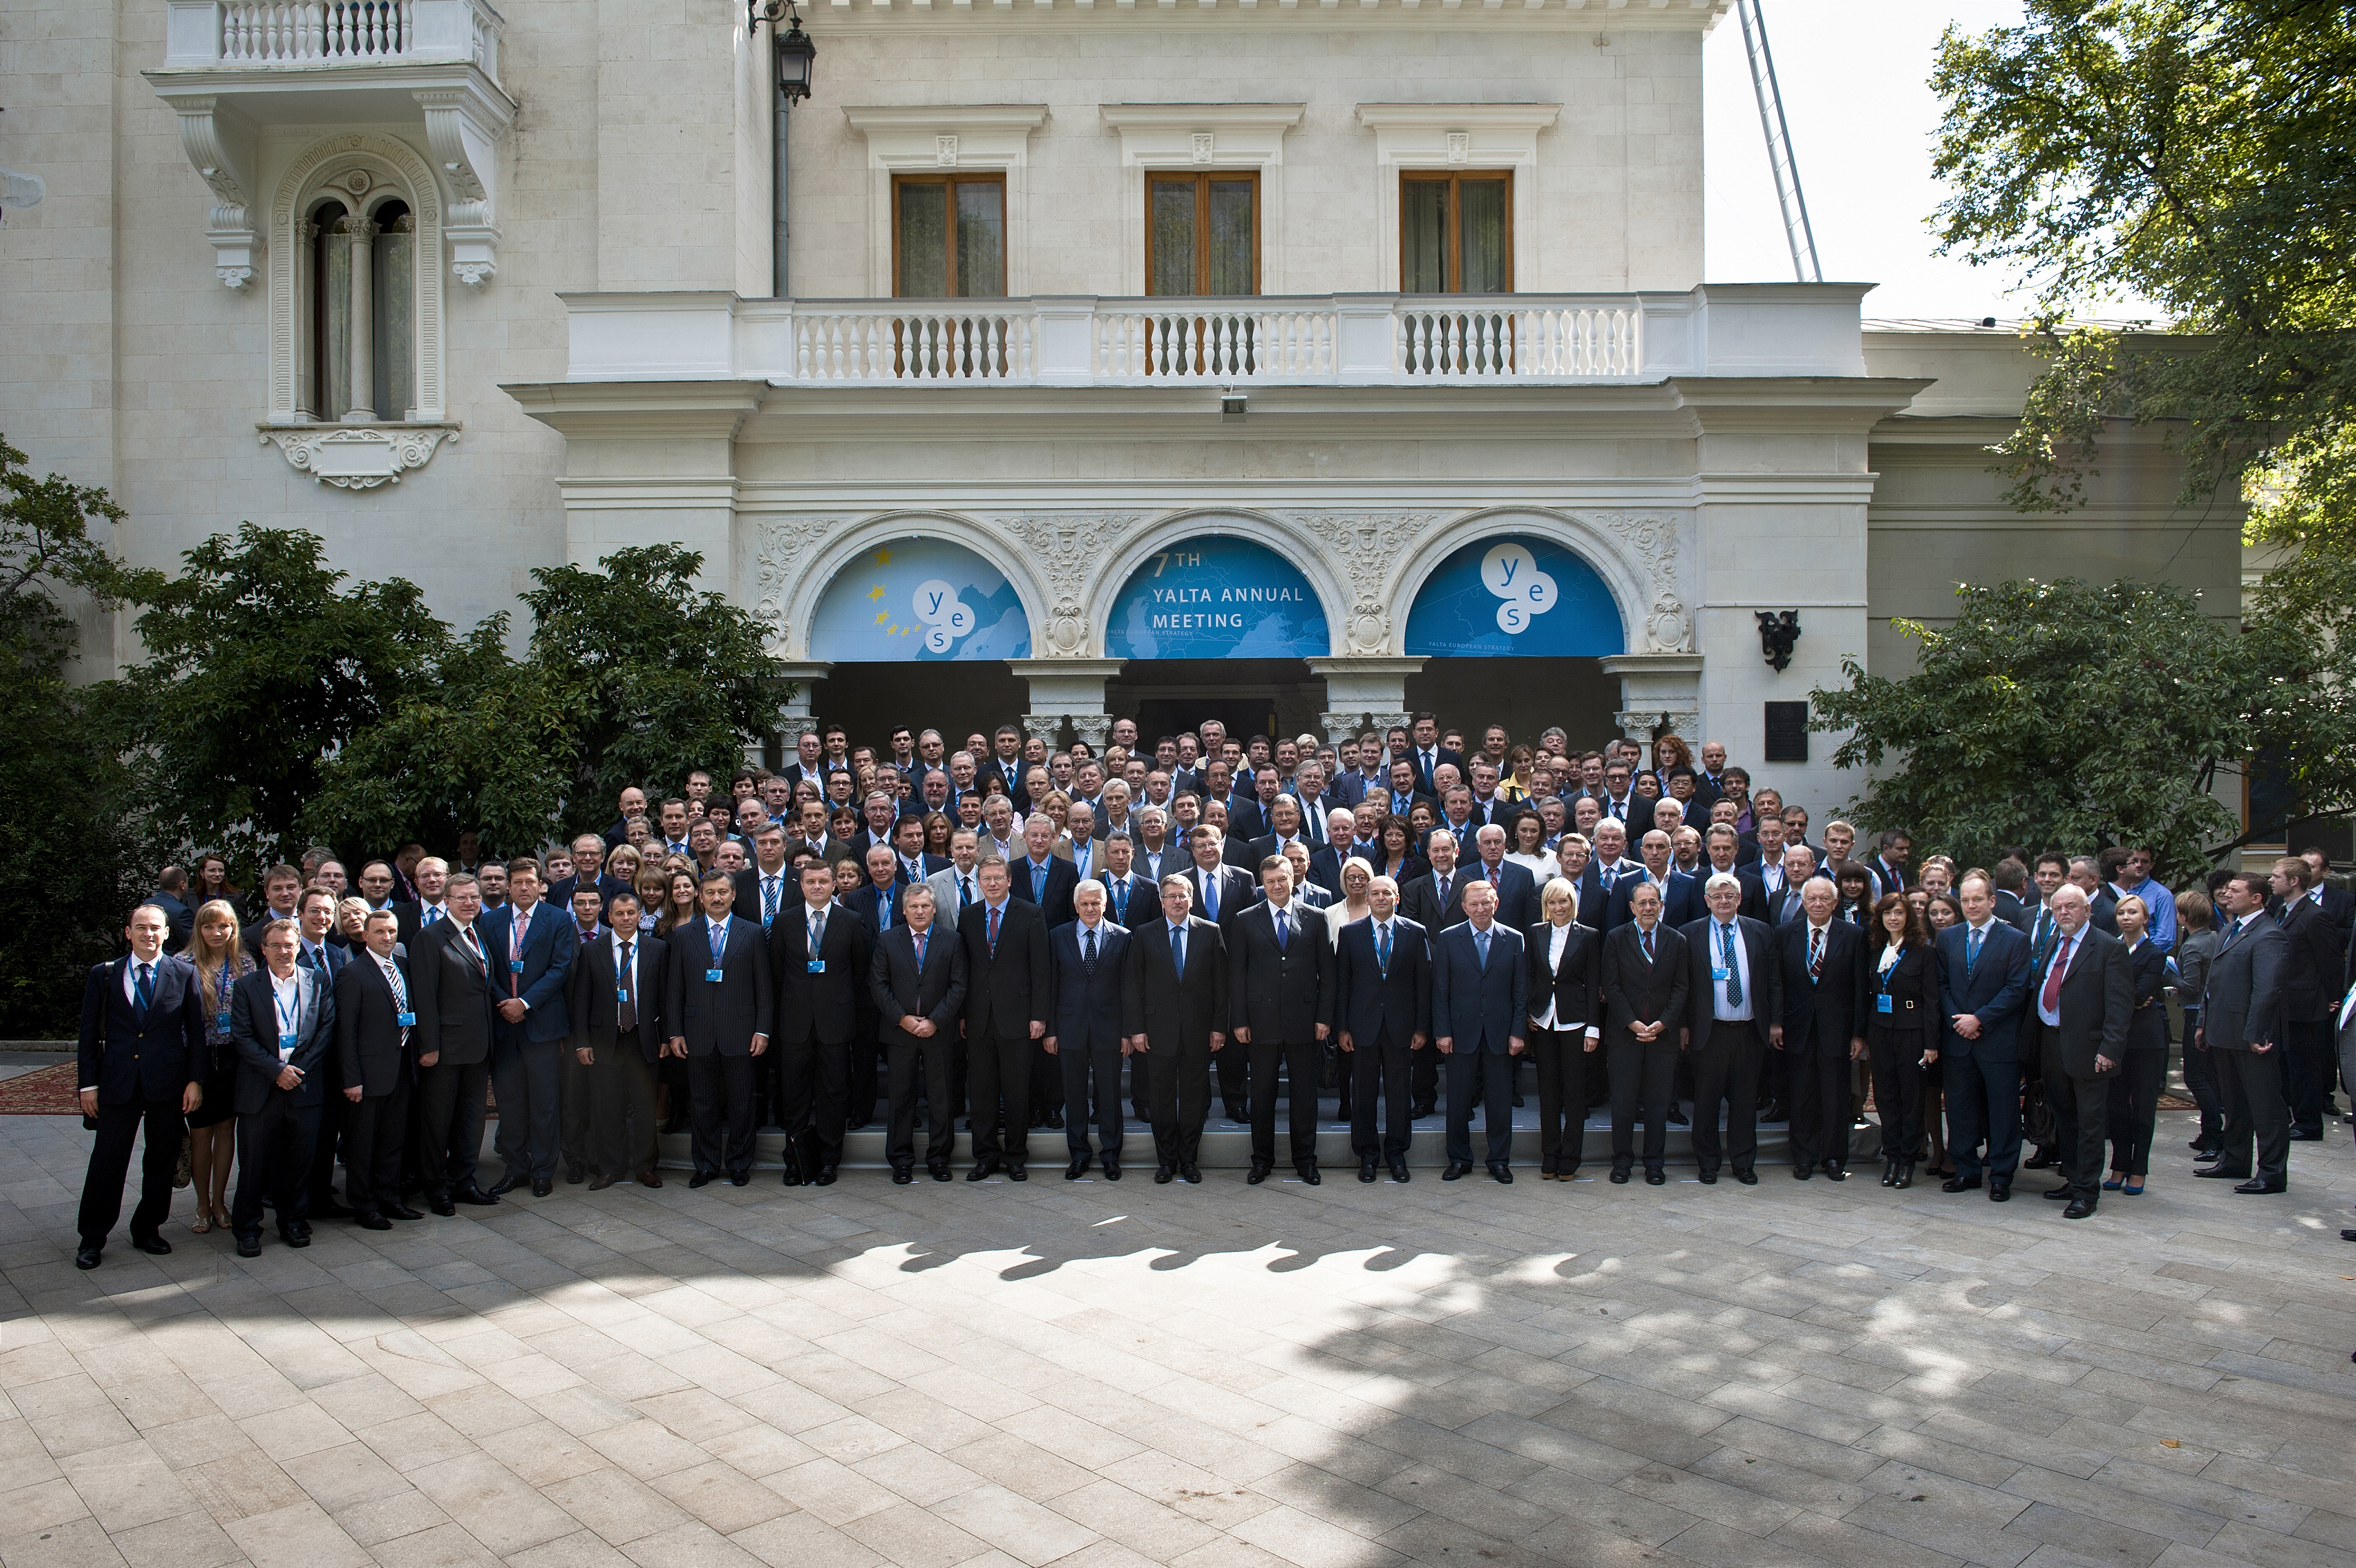 First day of the 7th Yalta Annual Meeting of YES